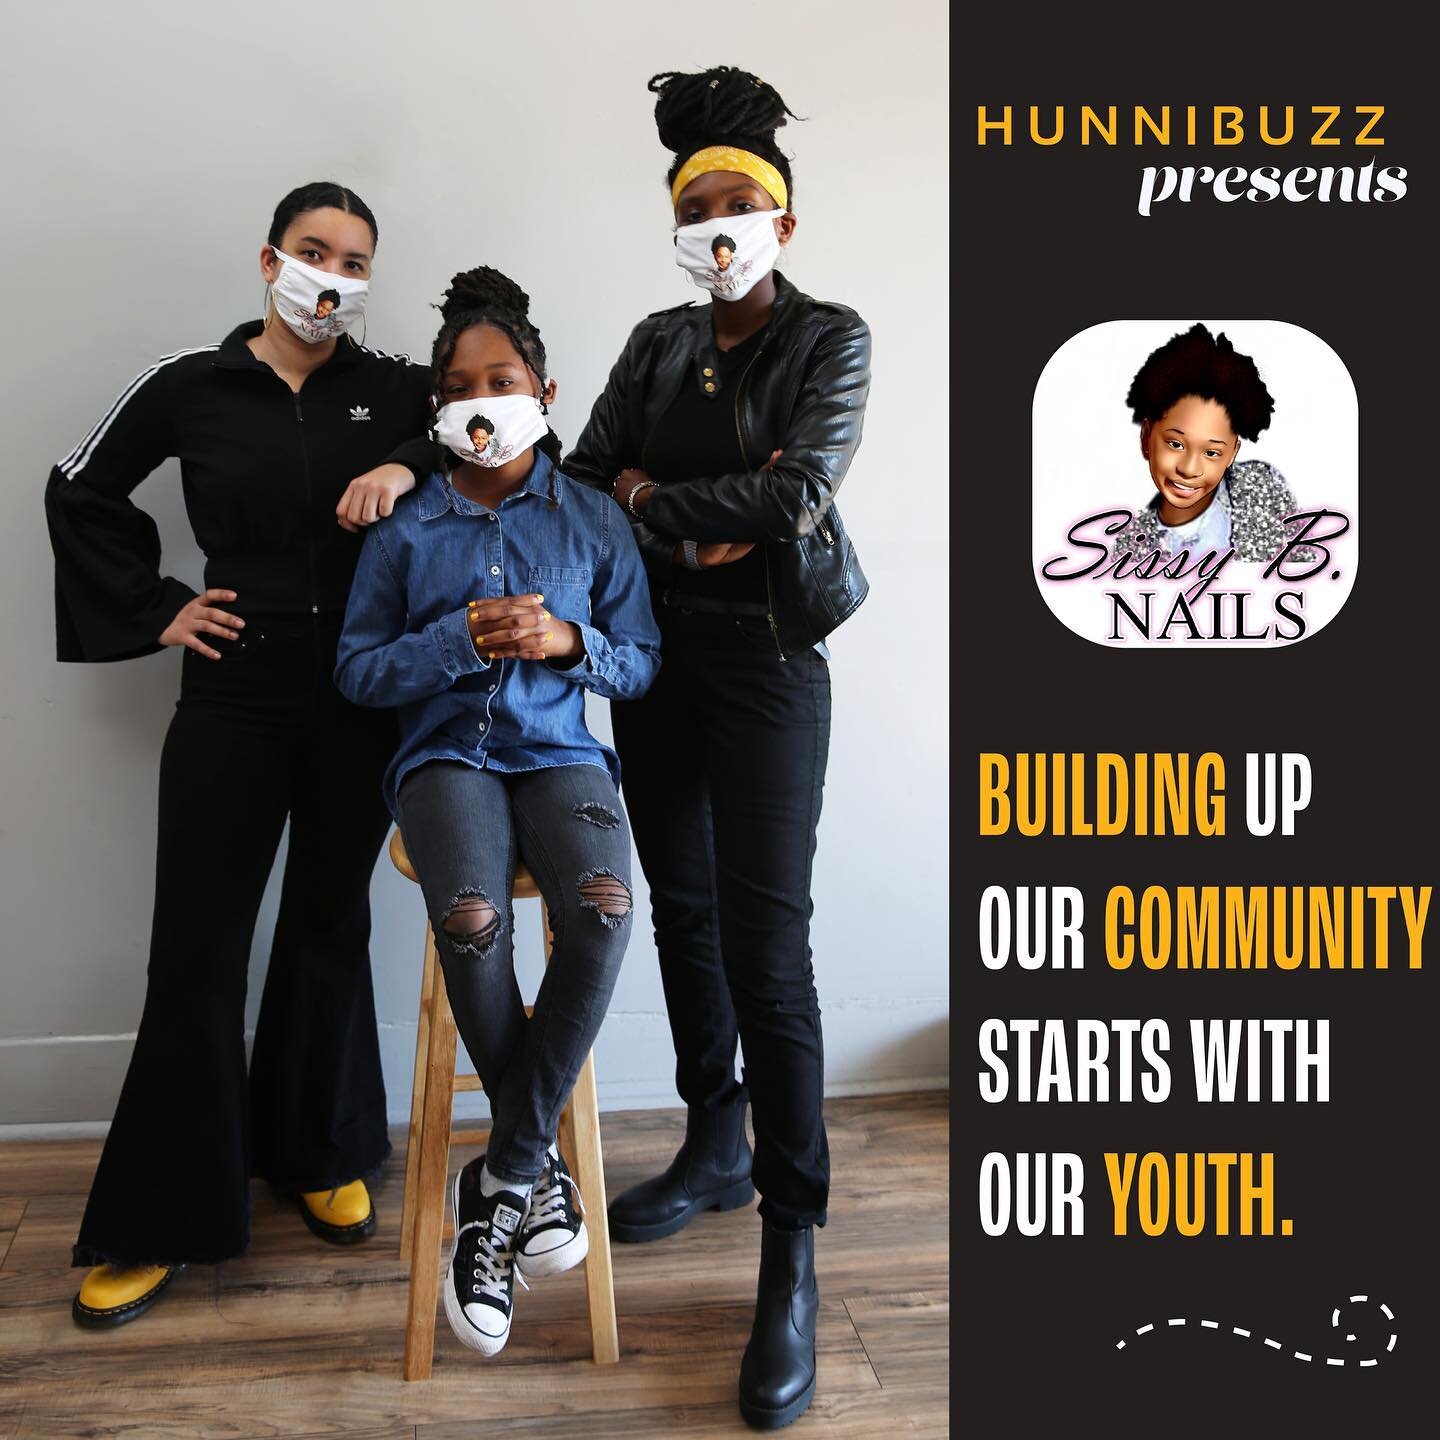 Hunnibuzz is proud to introduce 10-year-old Khiley of Sissy B Nails. After we heard about her nail polish business based in Long Beach- we knew we had to help out and offer our services to make sure that her online presence was as great as her busine